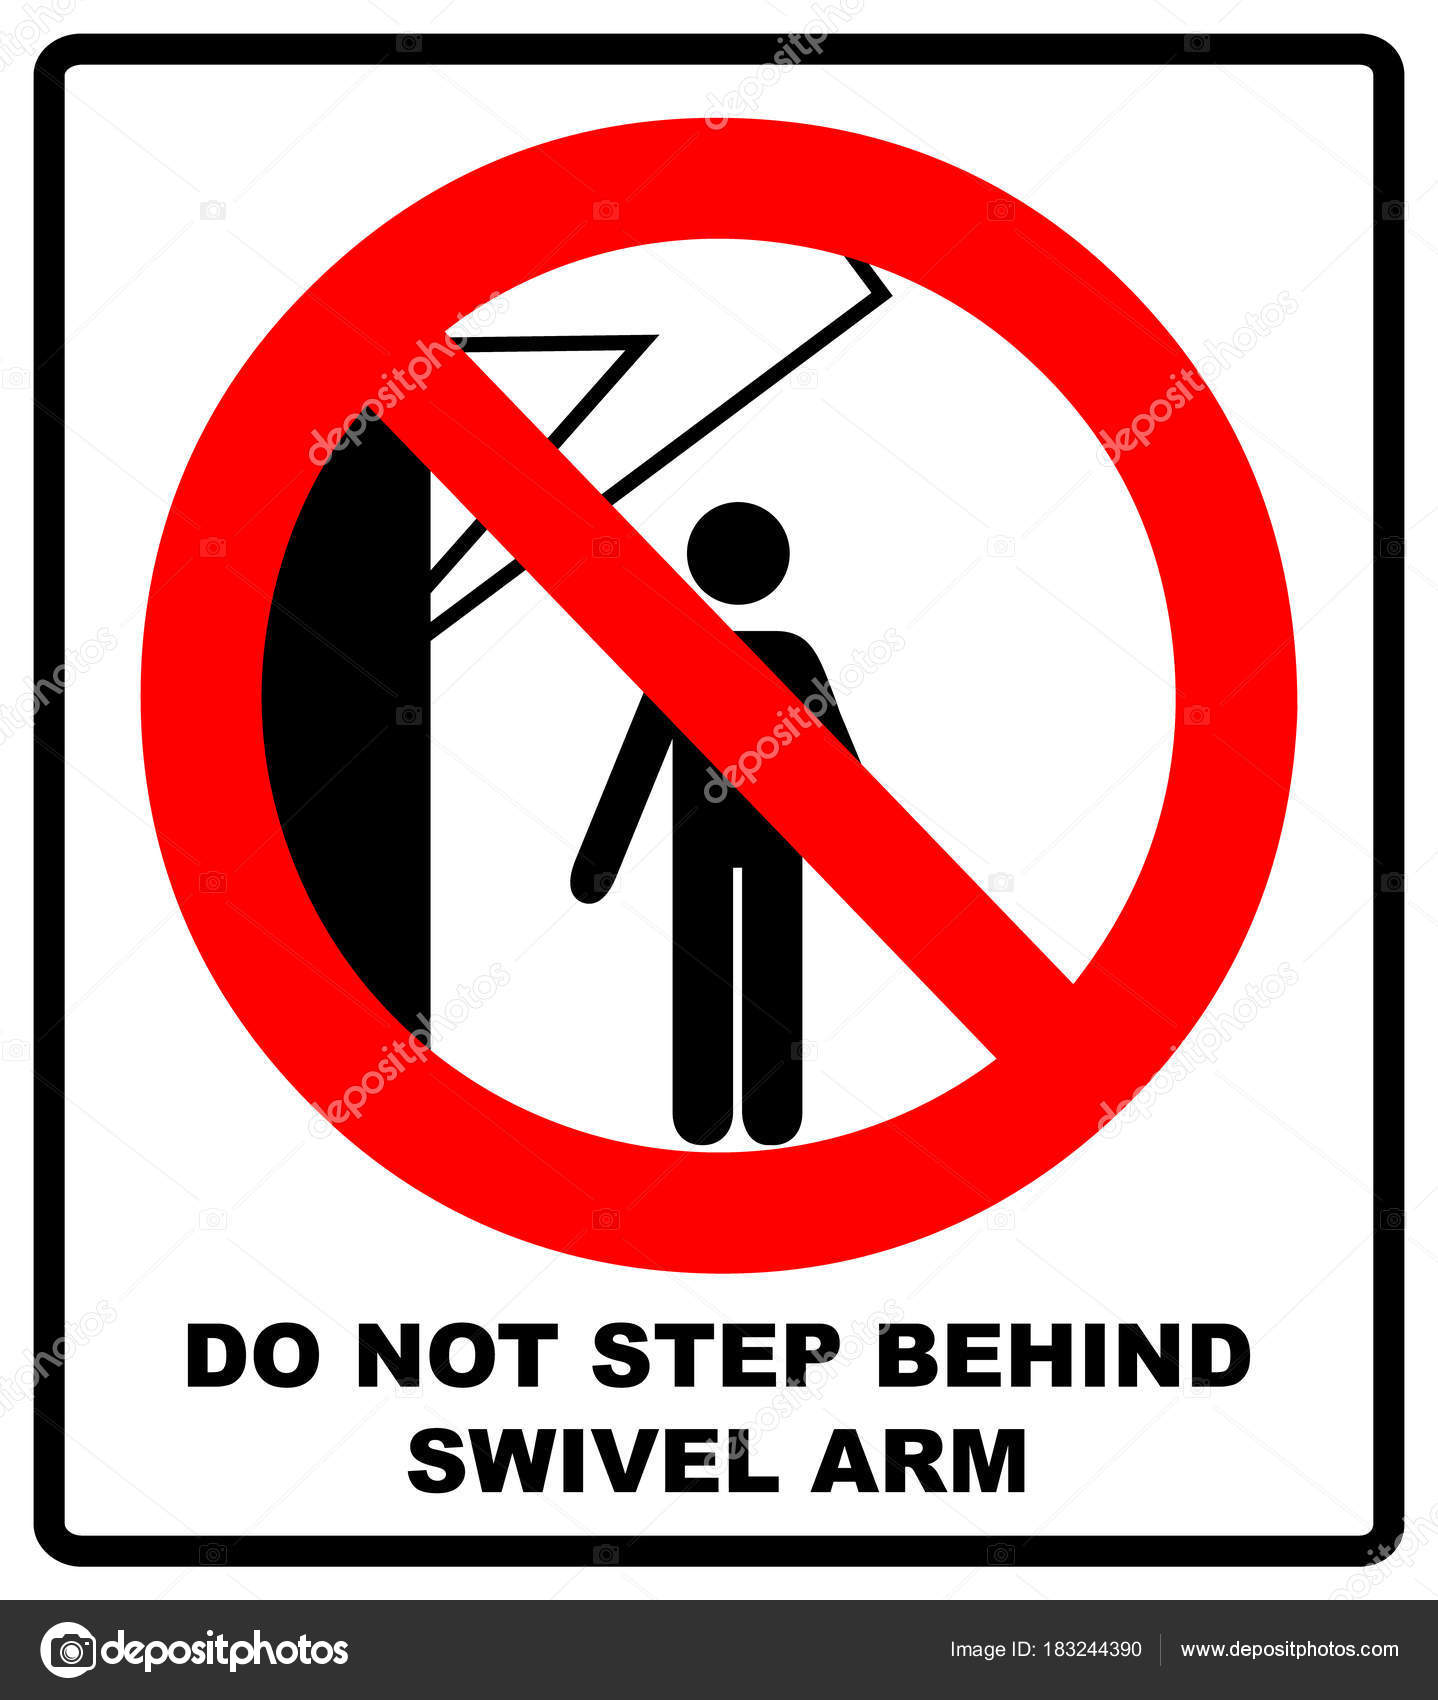 Do not step behind swivel arm sign. No people under raised load ...